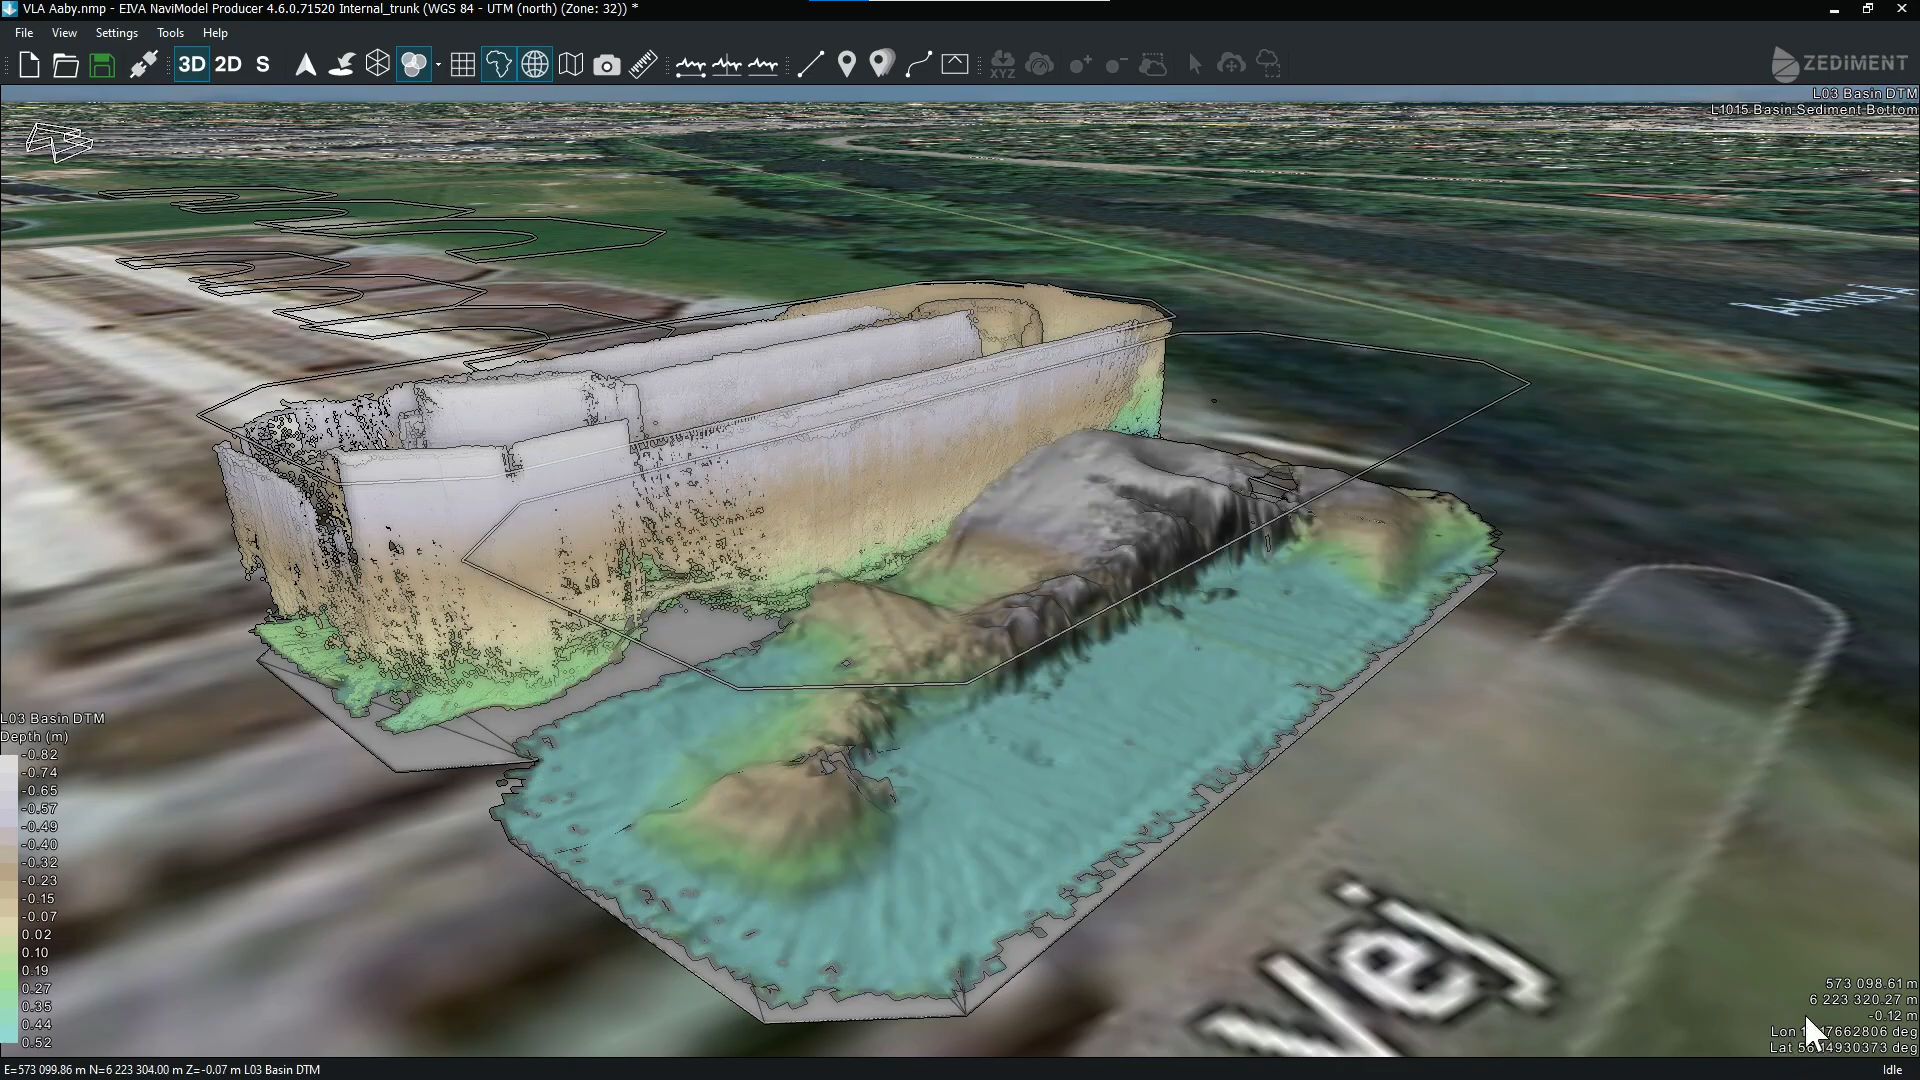 NaviModel 3D model of wastewater treatment plant scanned by Zediment